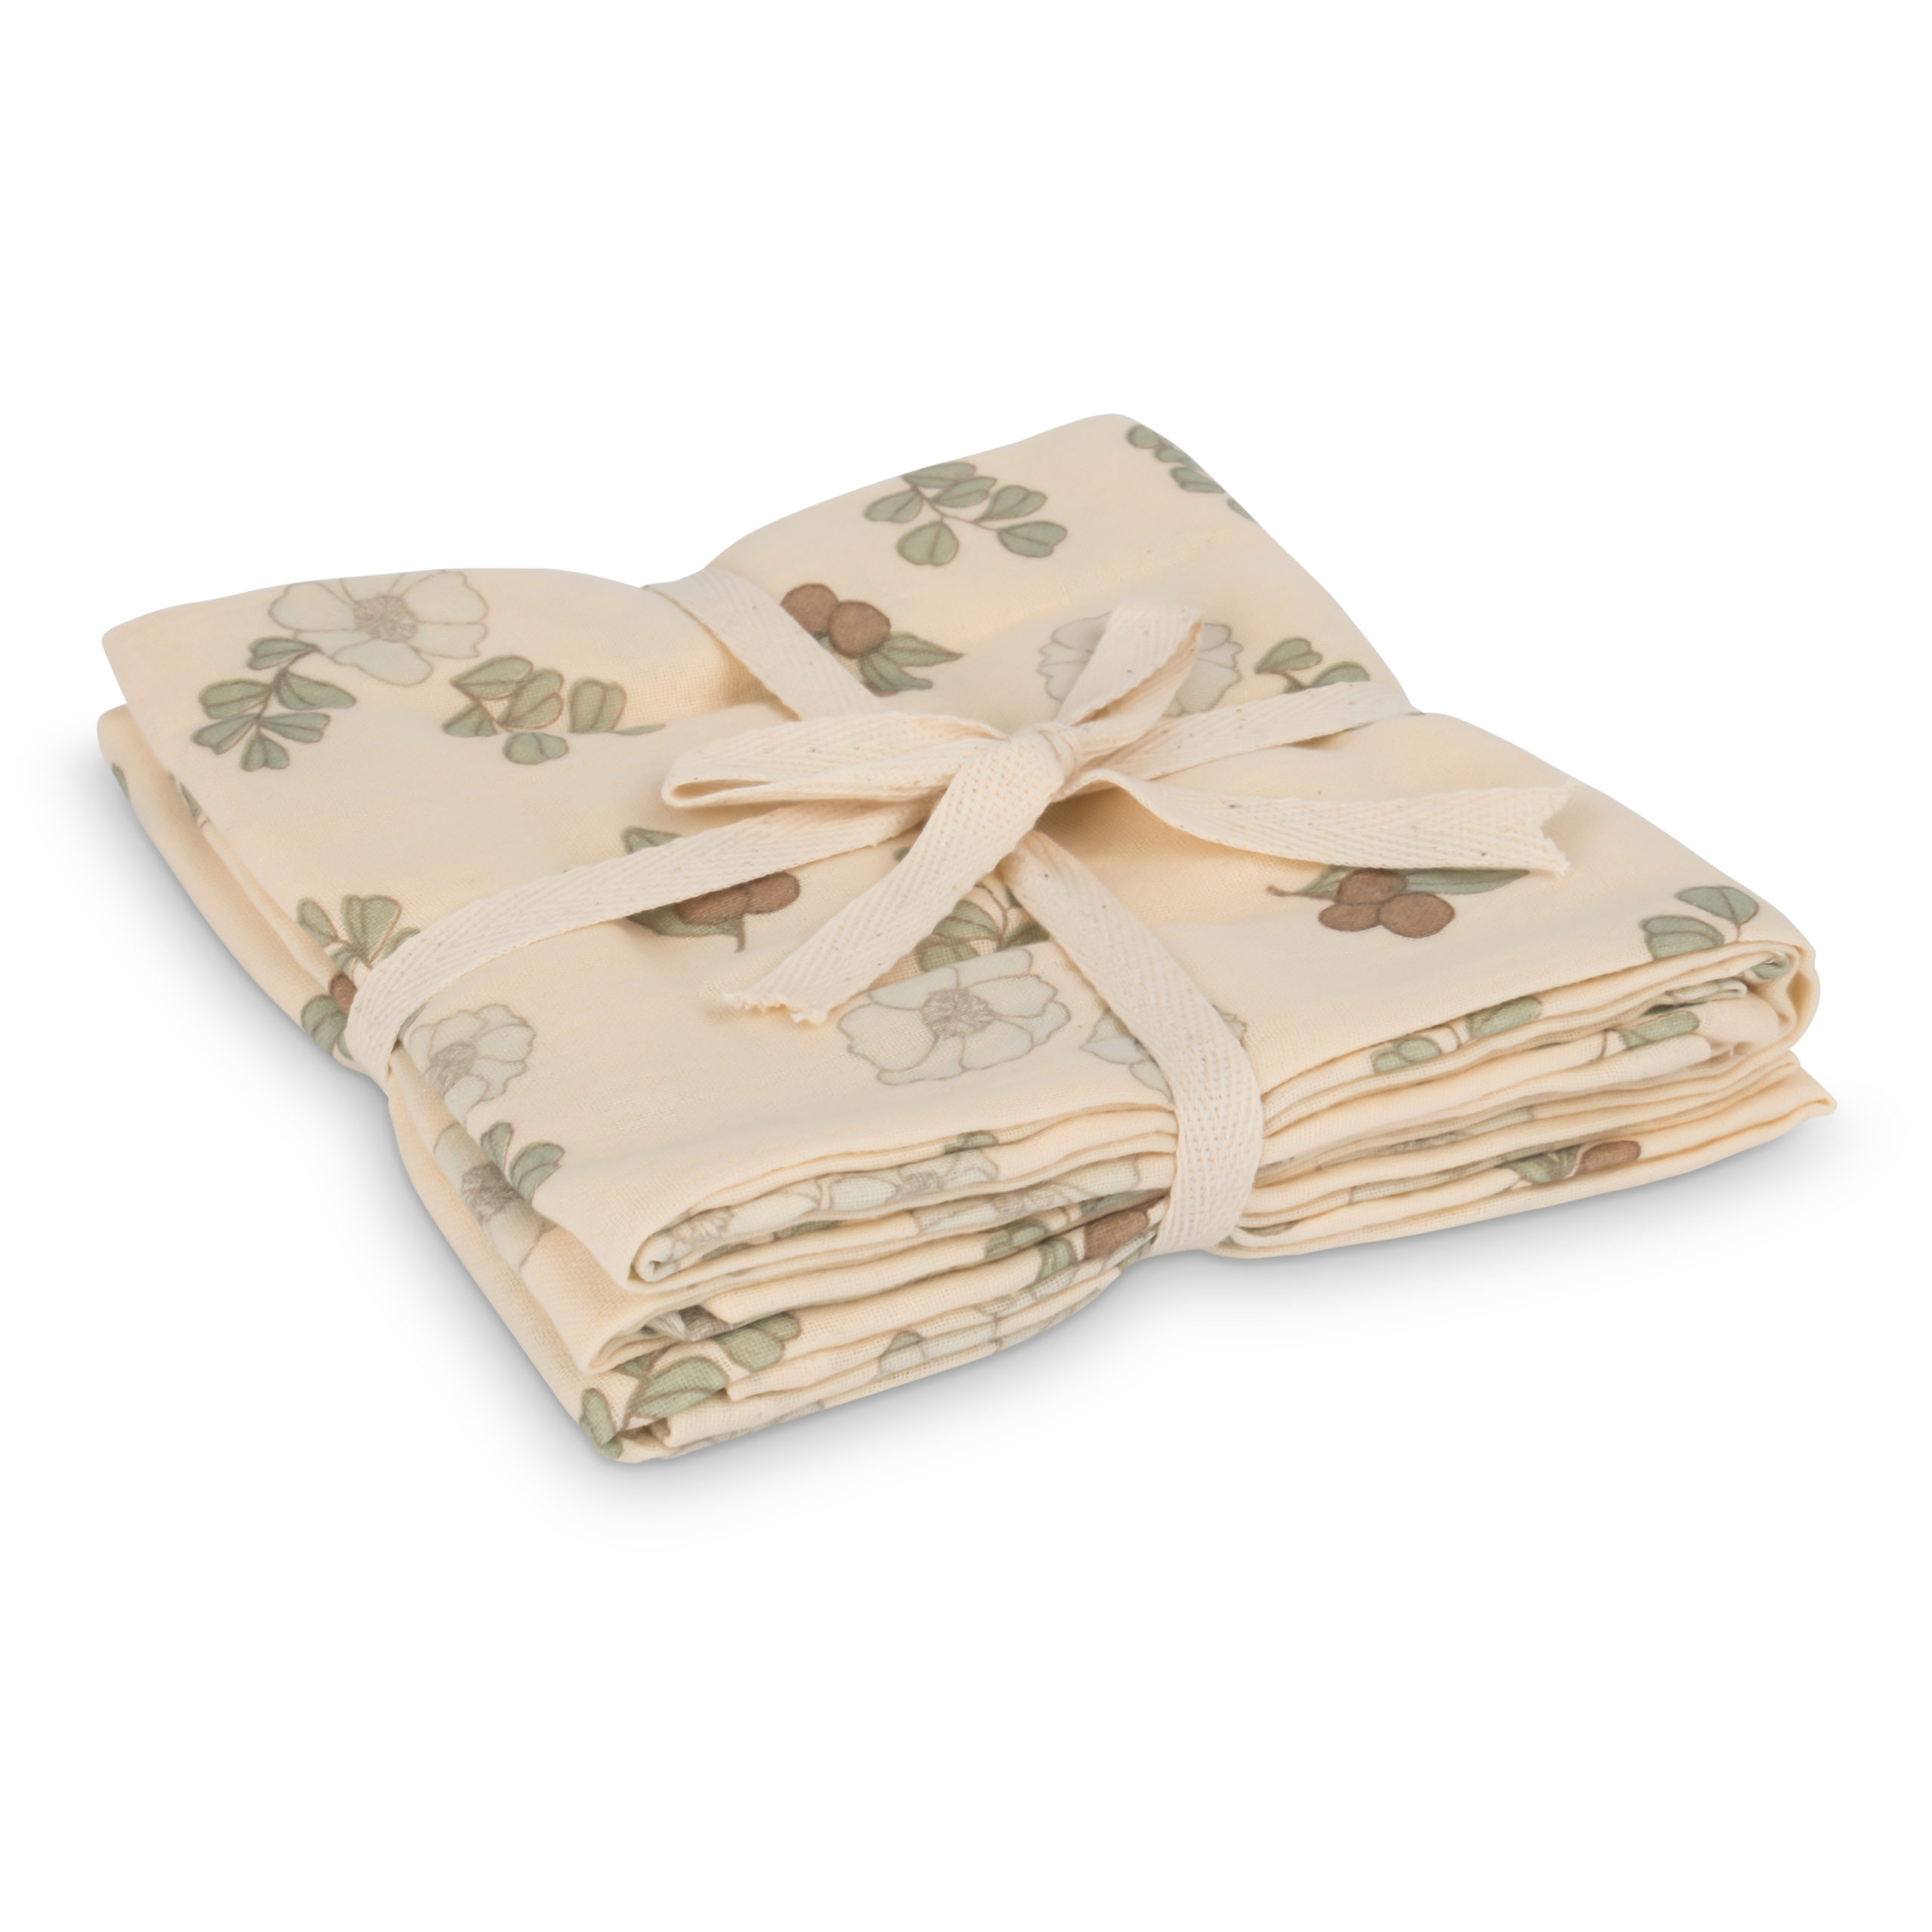 That's Mine - Muslin cloth 2-pack - Flowers and Berries (MC108)